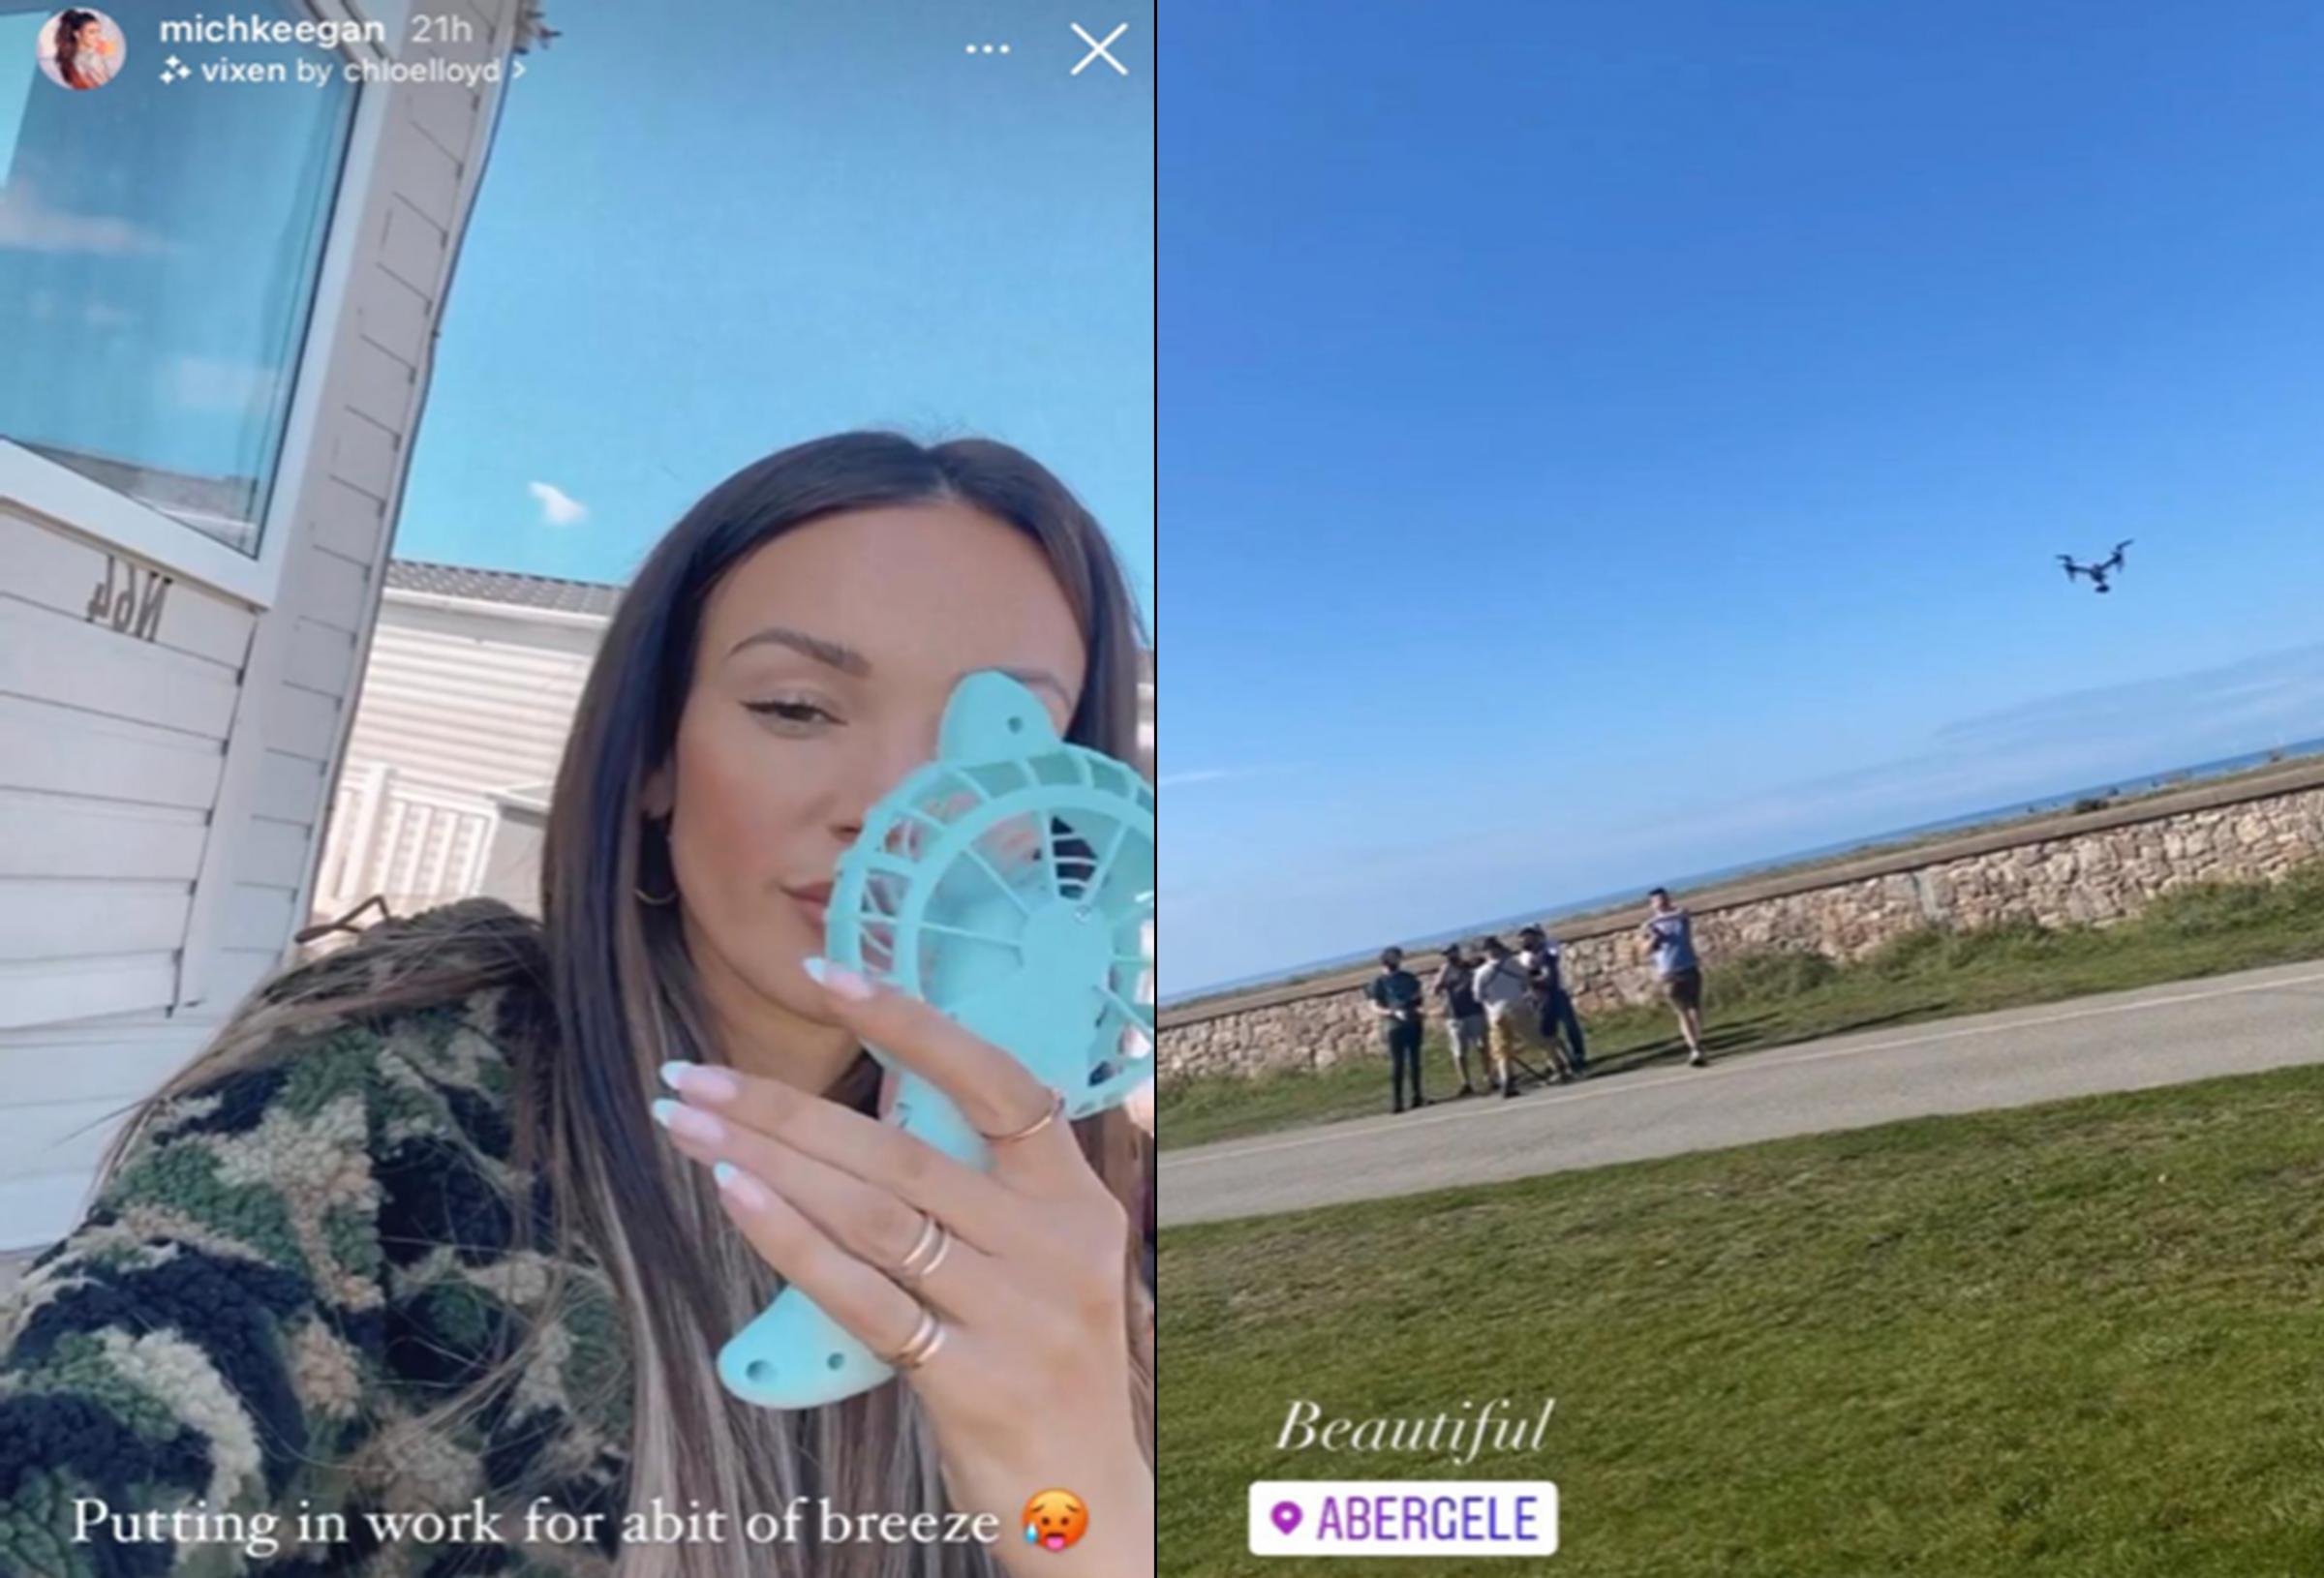 Michelle Keegan shared snaps of herself enjoying the late summer weather in Abergele.